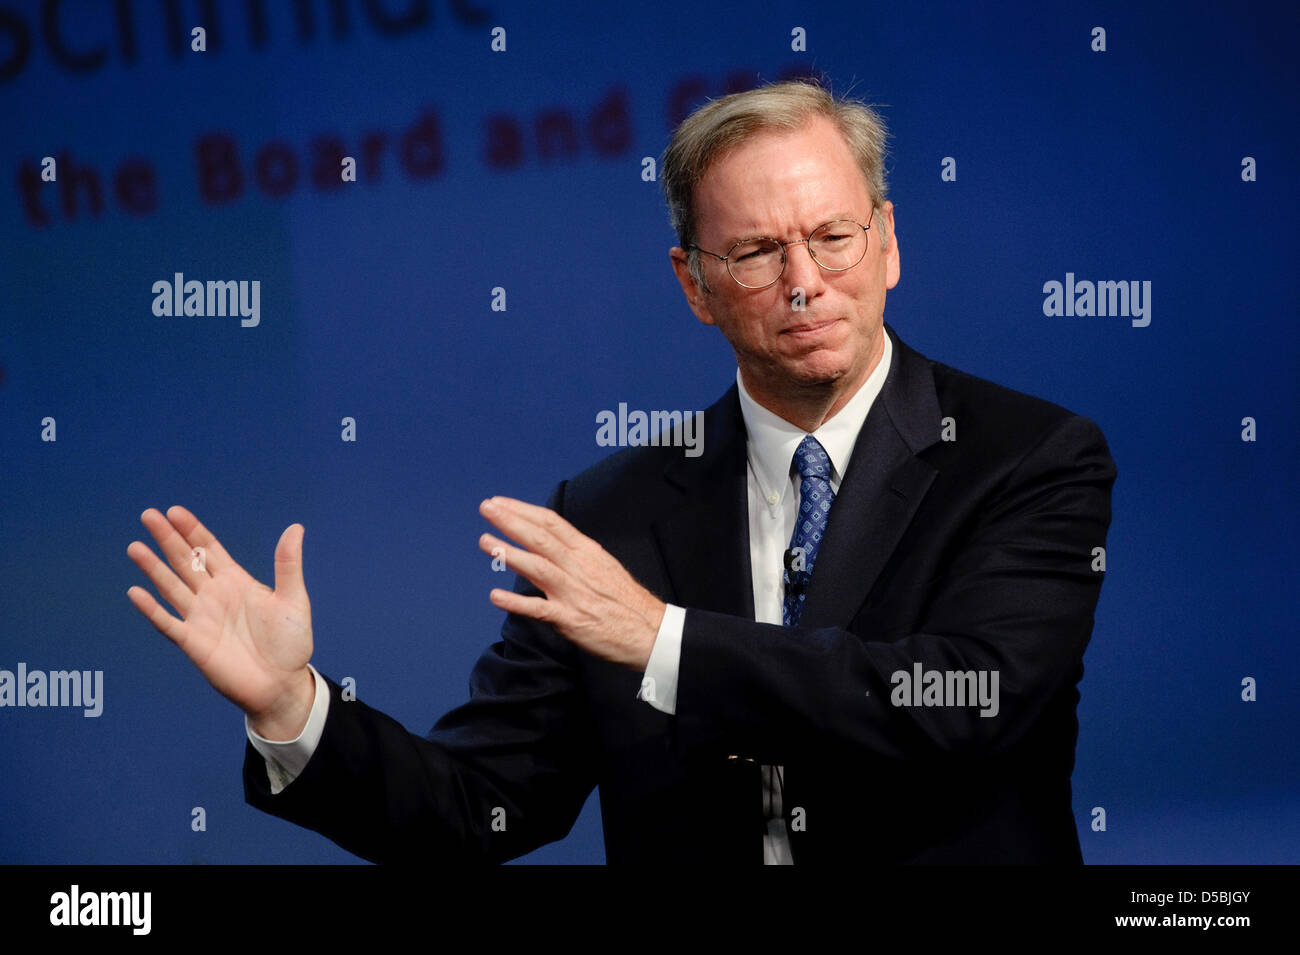 Google CEO Eric Schmidt delivers a press conference at the International radio exhibition IFA in Berlin, Germany, 07 September 2010. The worldwide biggest industrial exhibition for consumer electronics is open from 03 until 08 September 2010 at the exhibition hall situated under the radio tower in Berlin. Photo: ROBERT SCHLESINGER Stock Photo